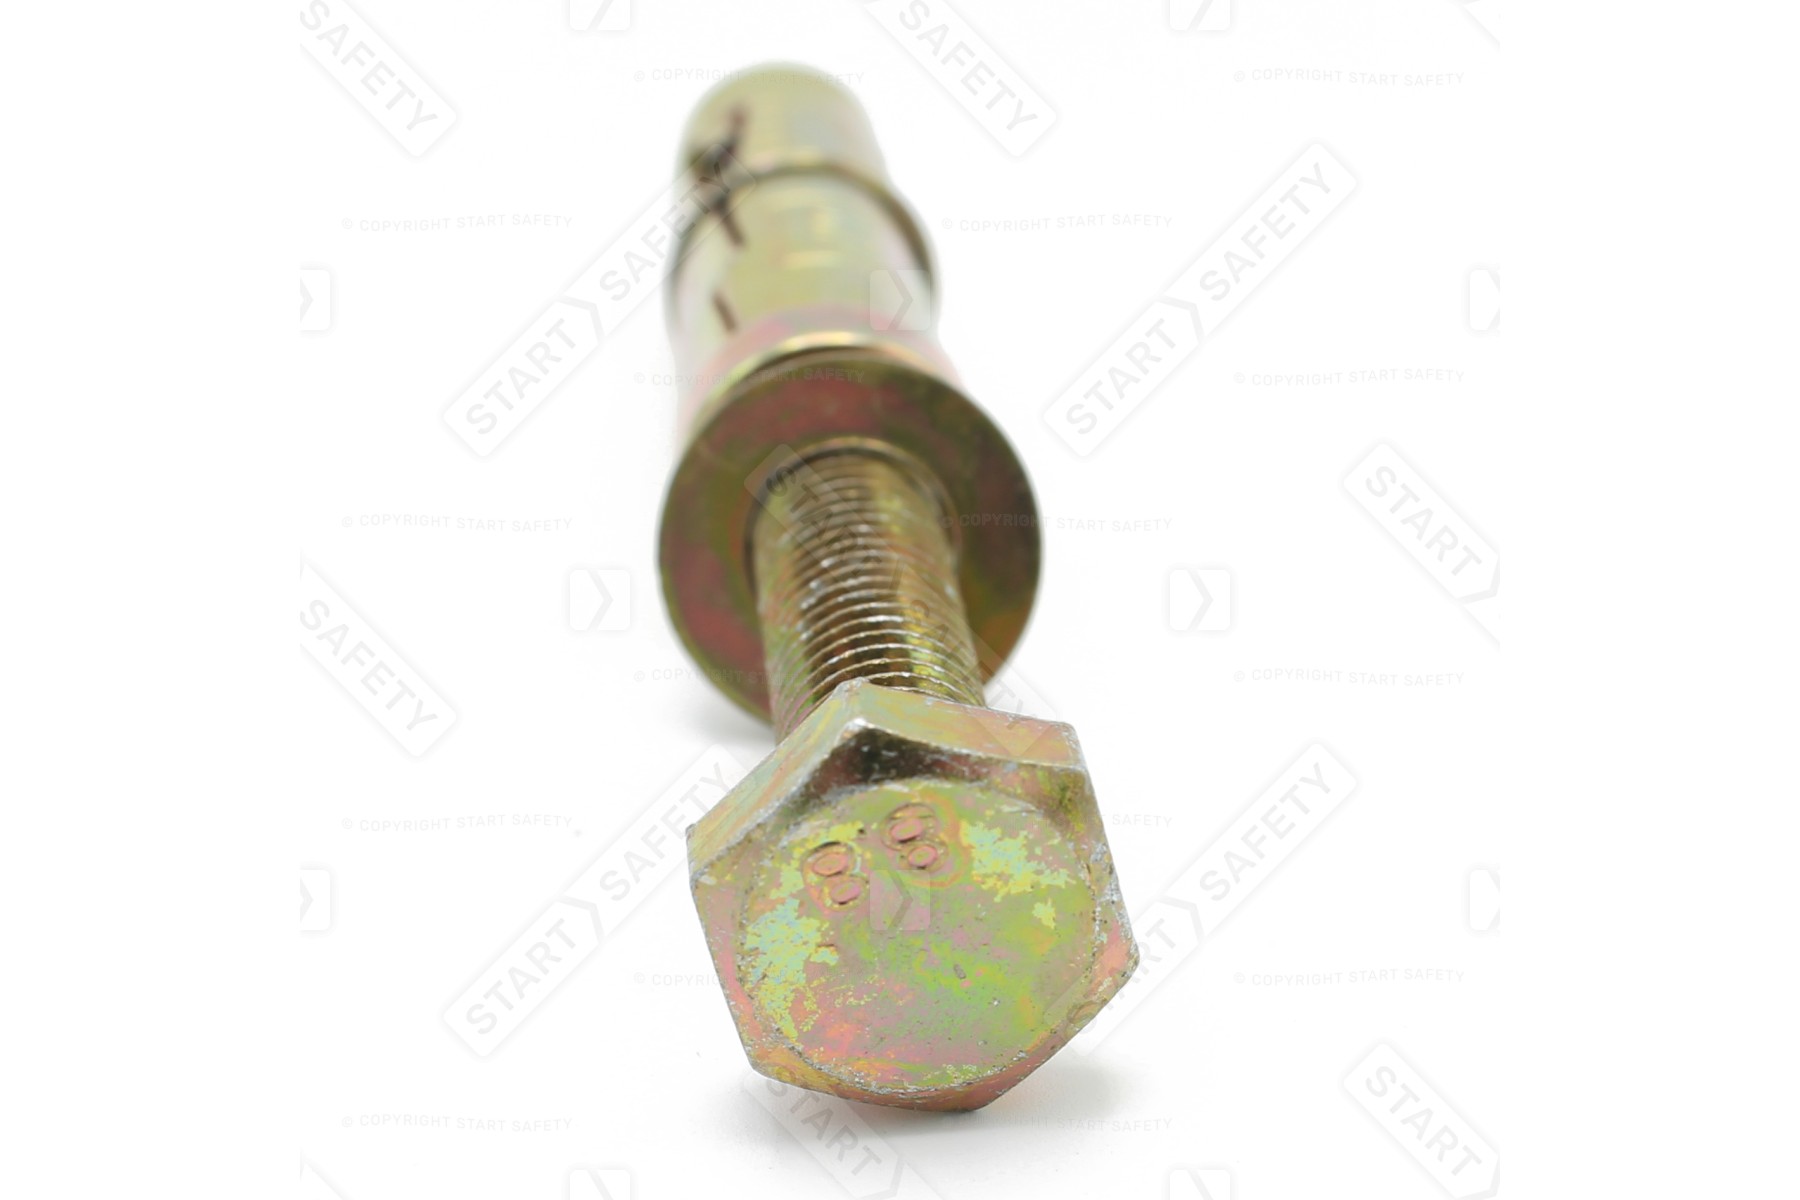 Fischer M10 Shield Anchor Bolt Concrete Fixings In Stock